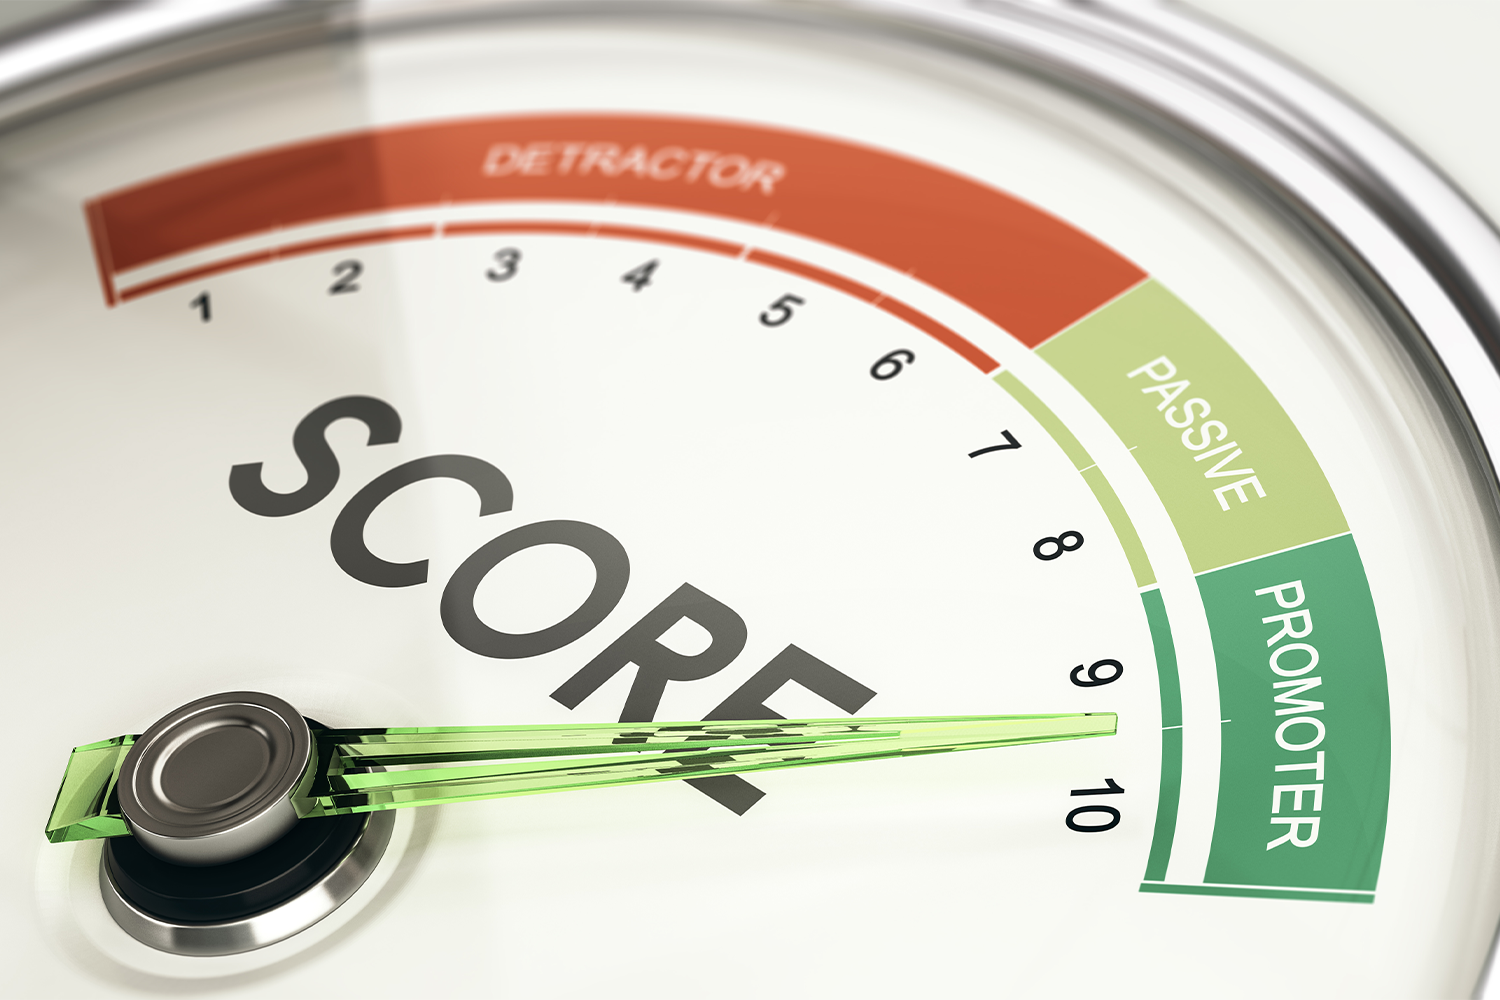 What Is Considered a Good Net Promoter Score (NPS)?